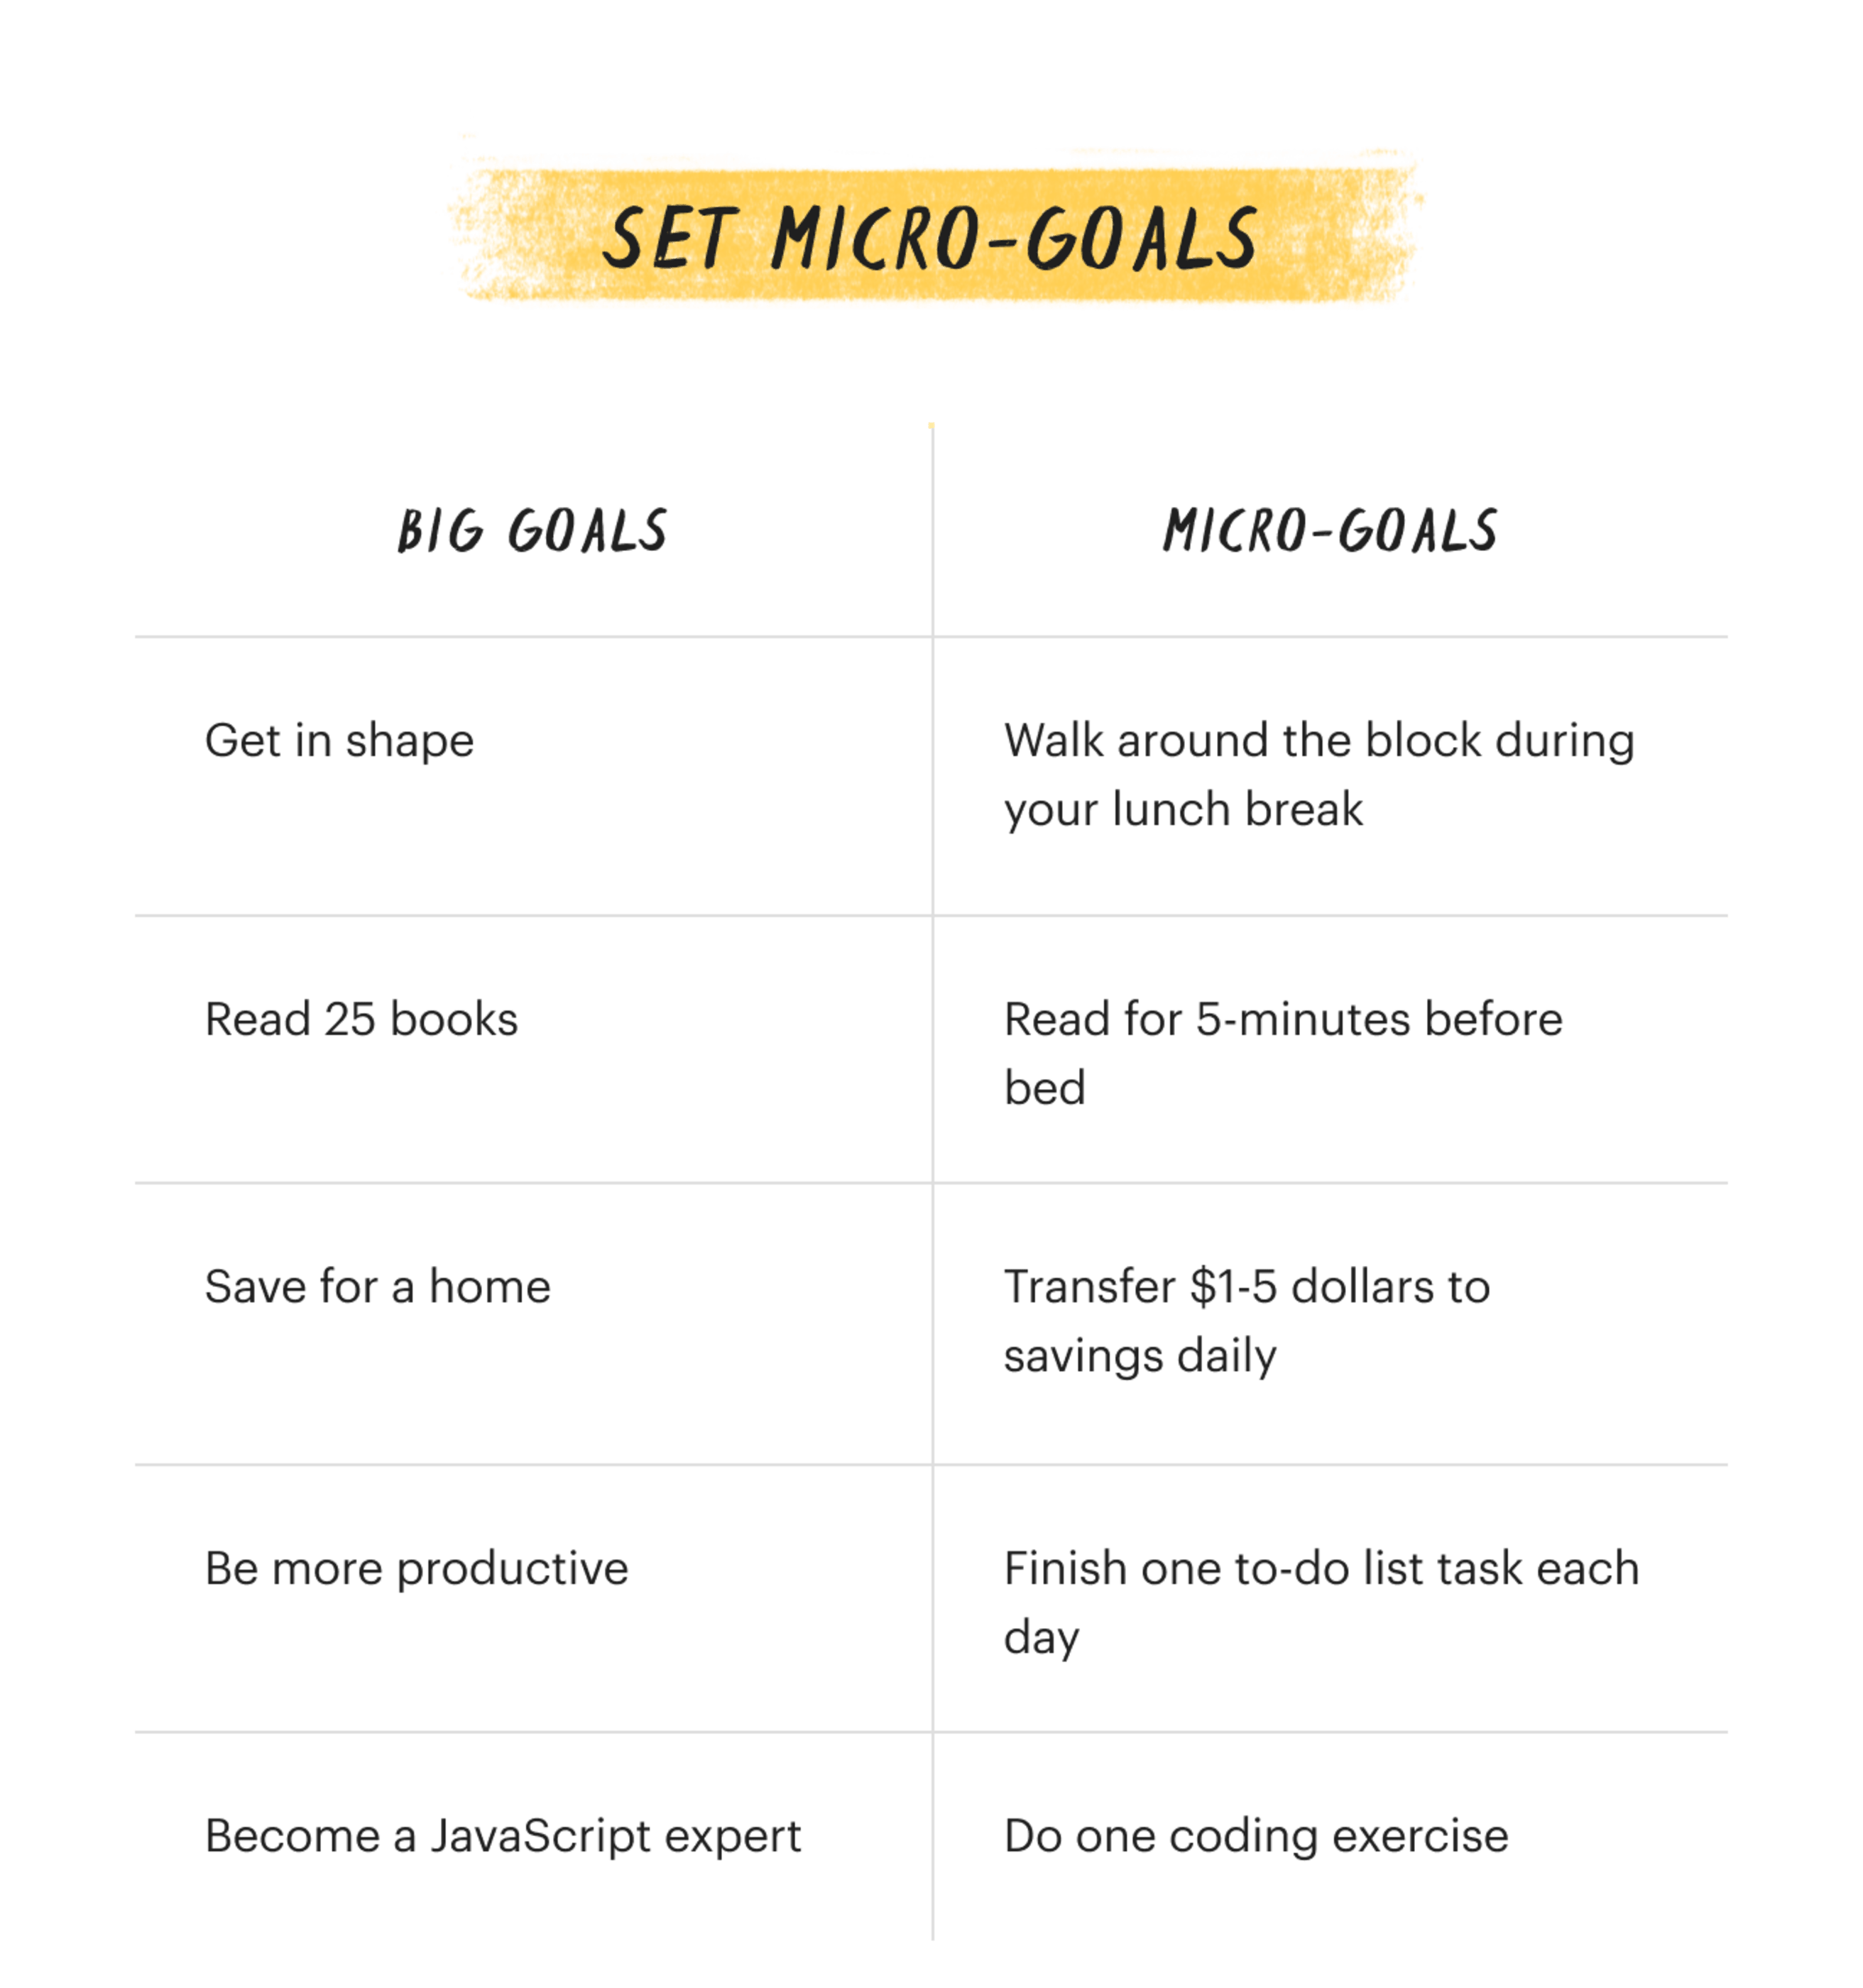 Calendar • My goals plan for the year, Atomic Habits for a